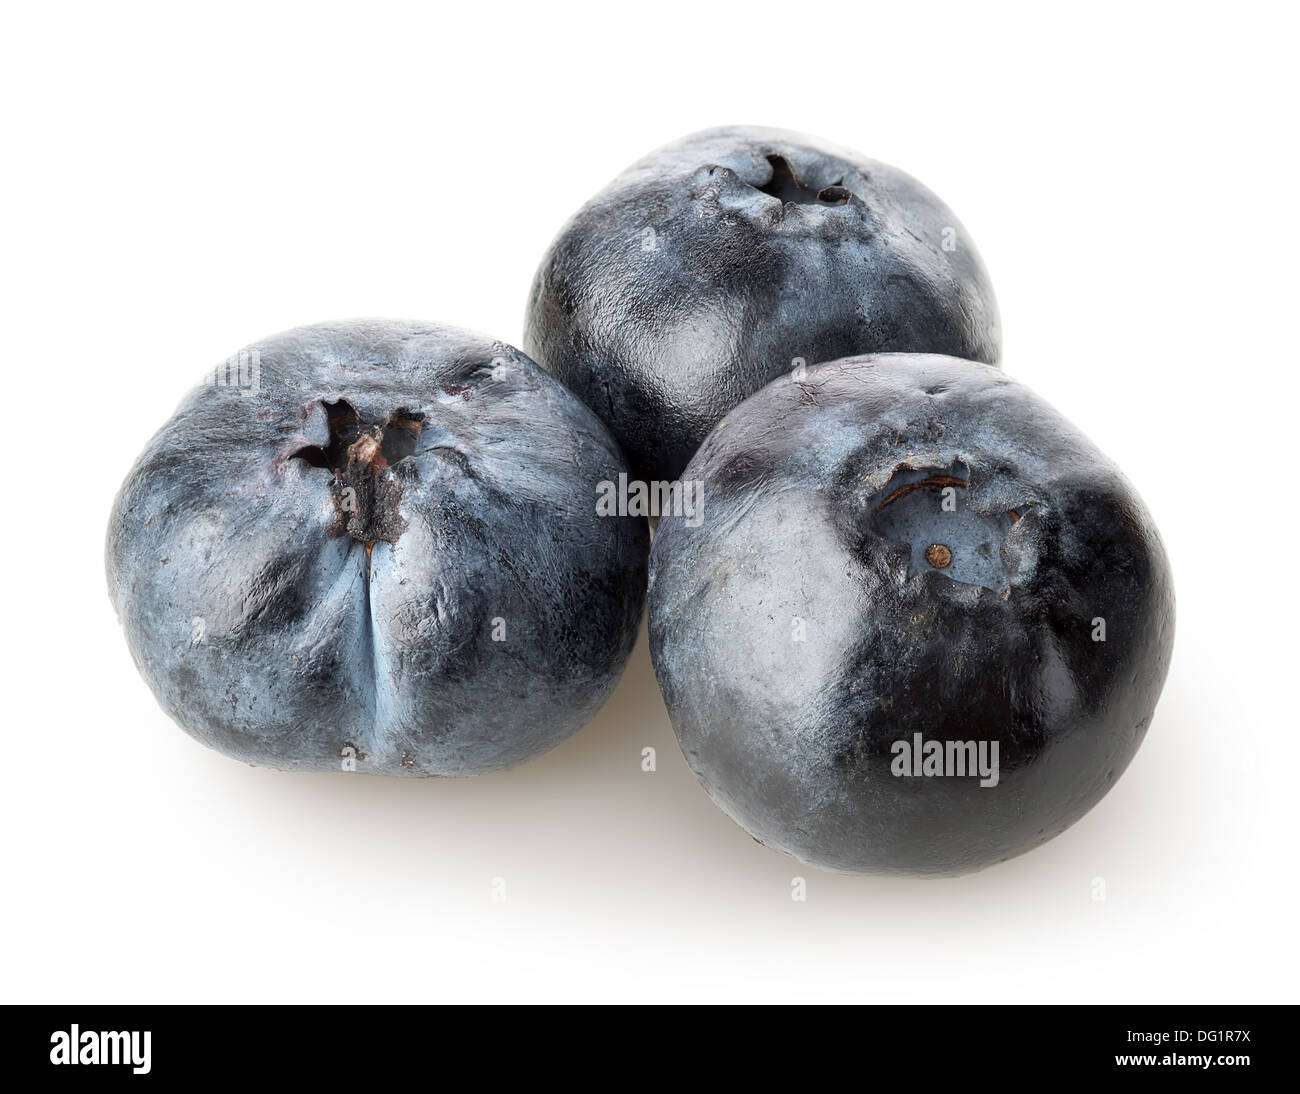 Three sweet blueberries isolated on a white background Stock Photo